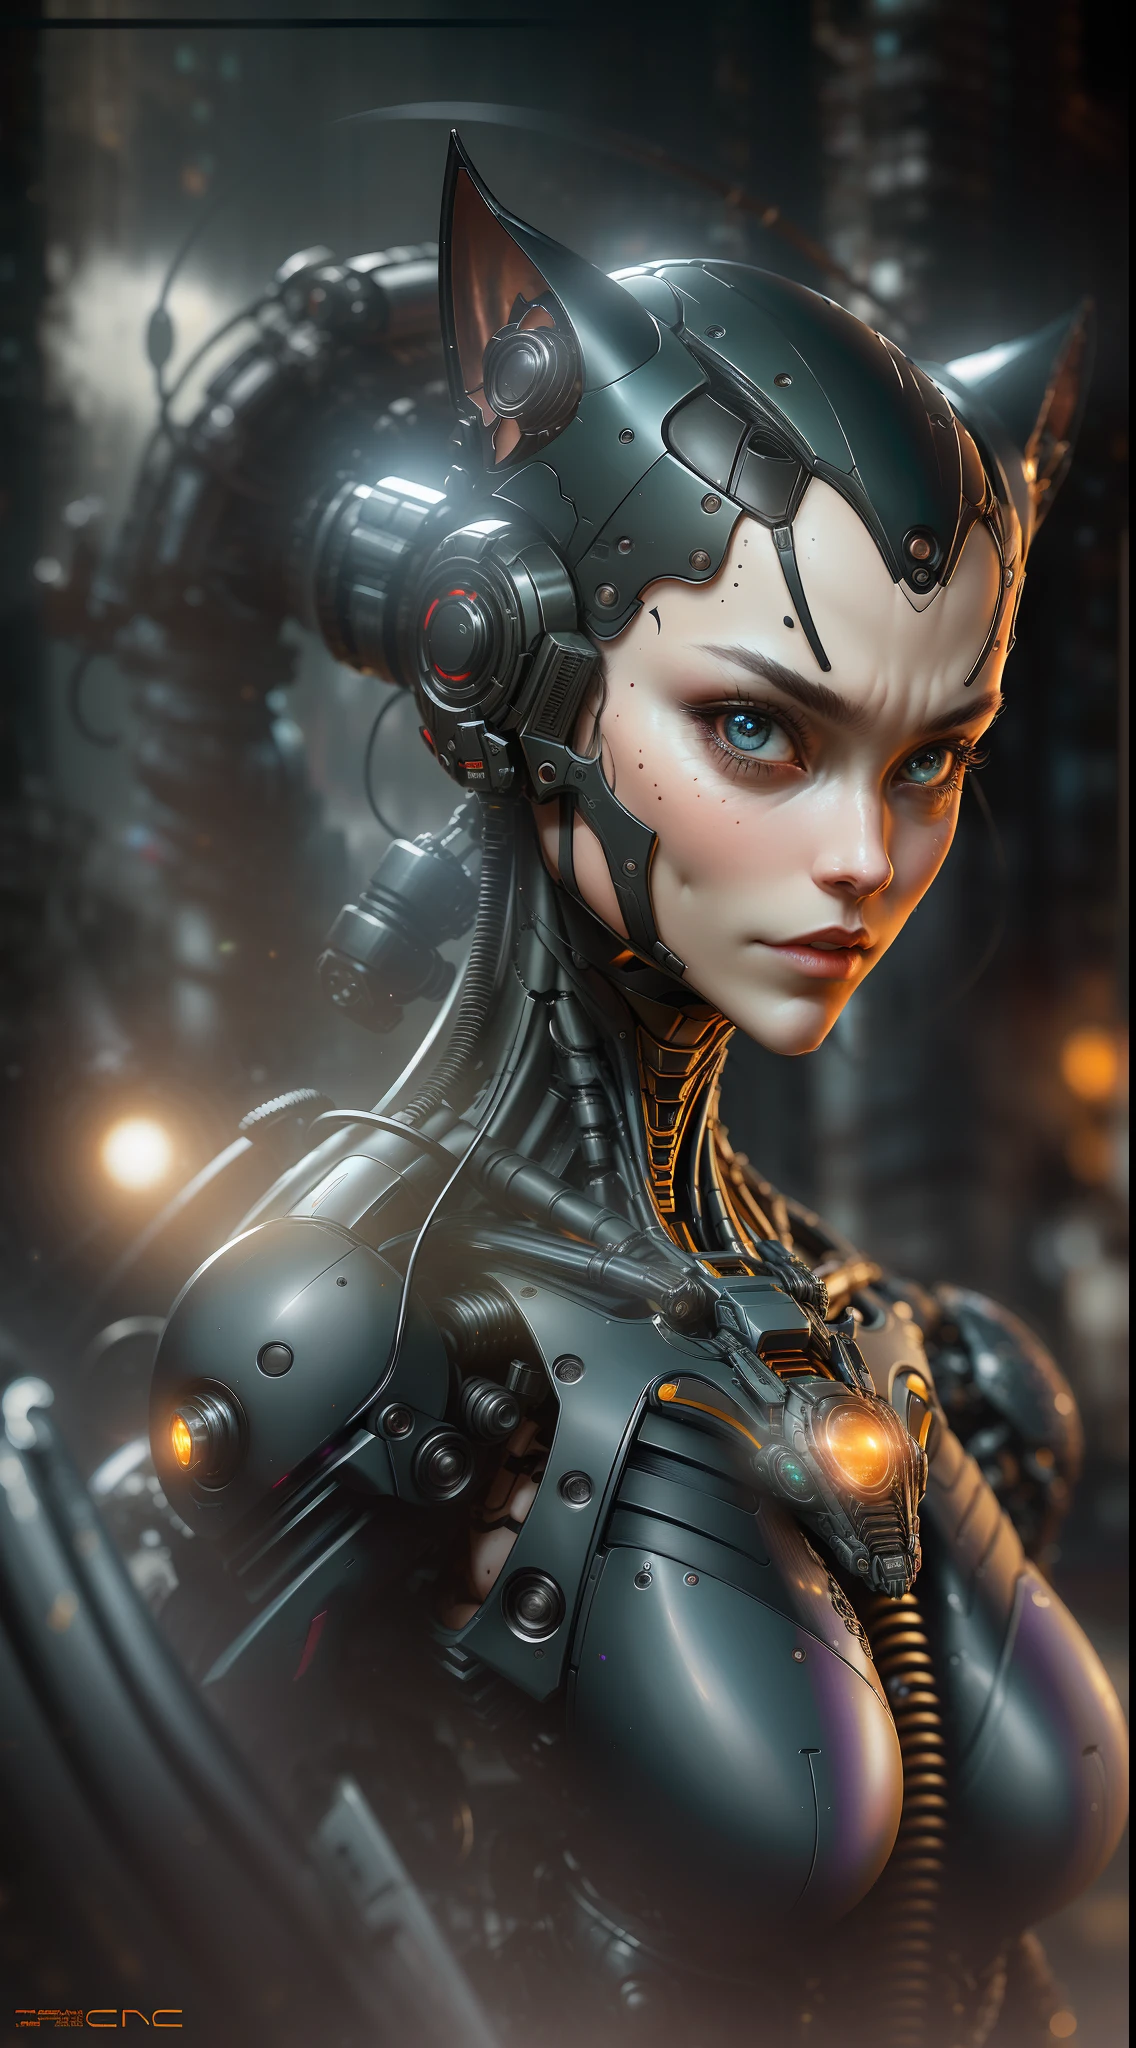 Catwoman from DC photography, biomechanical, complex robot, full growth, hyper-realistic, insane small details, extremely clean lines, cyberpunk aesthetic, masterpiece featured on Zbrush Central